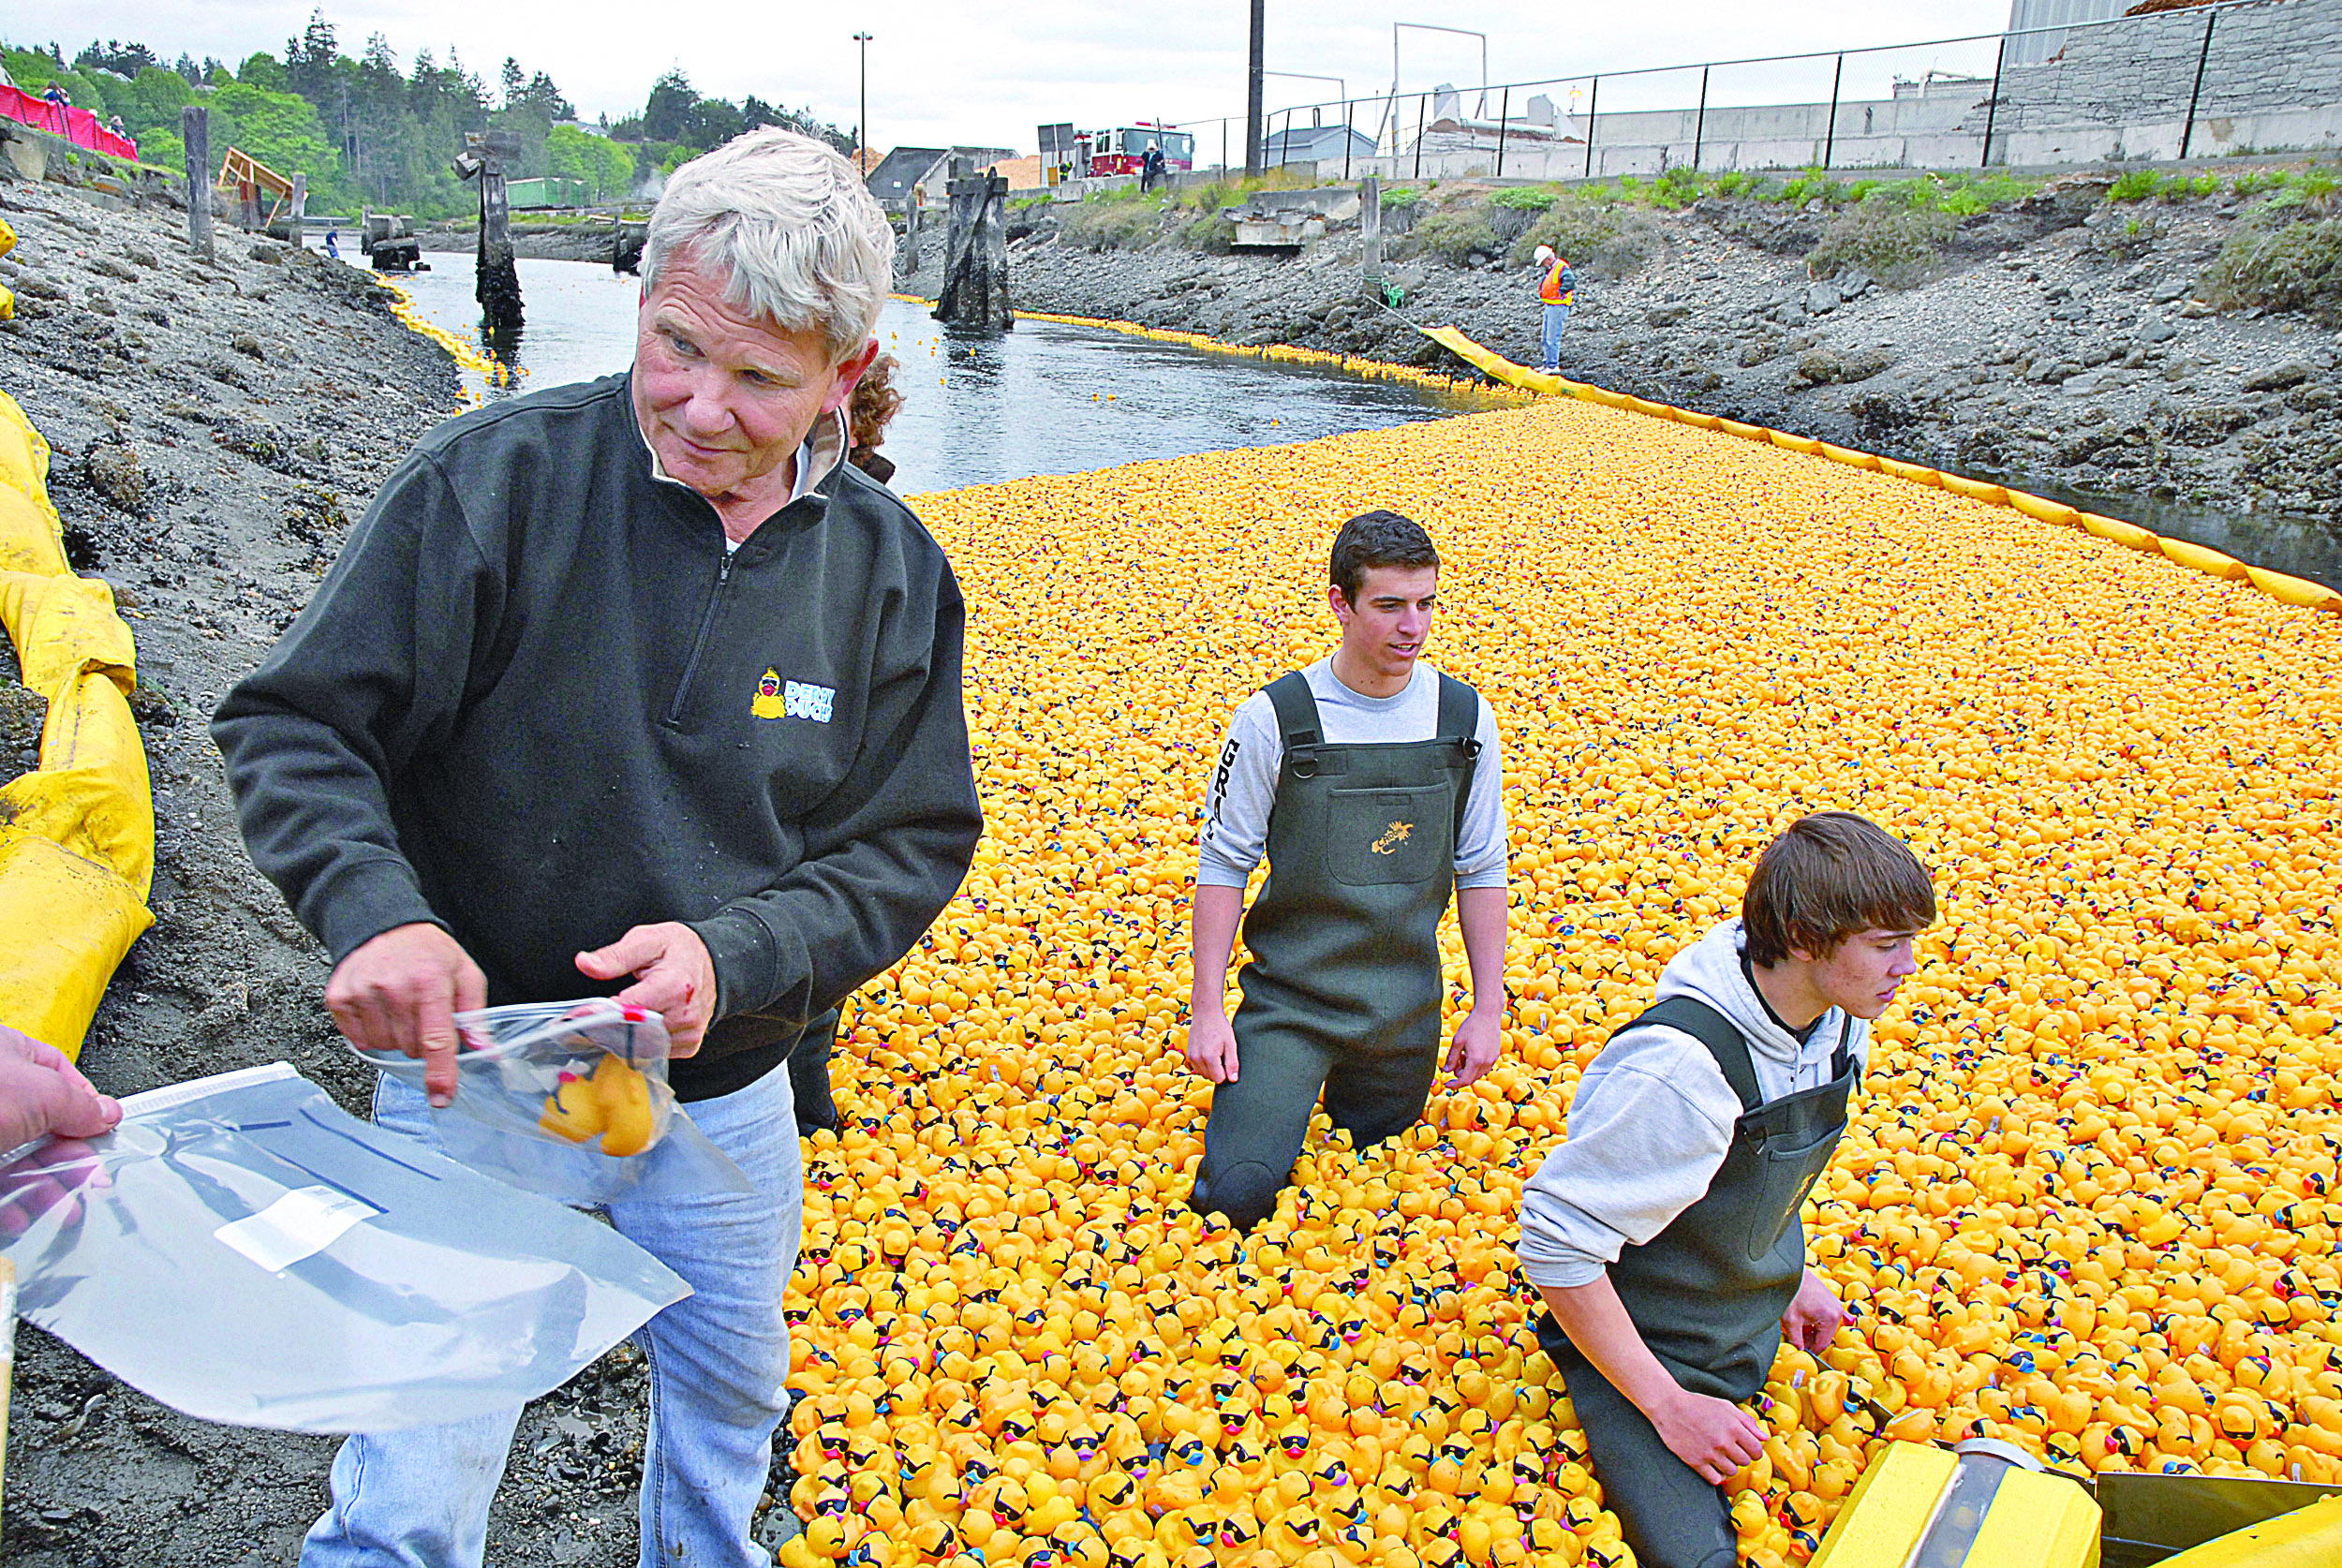 Bob Lovell bags one of the first 50 ducks that came across the finish line during the 22nd annual Great Olympic Peninsula Duck Derby in Port Angeles in 2011. At center is Zach Grall